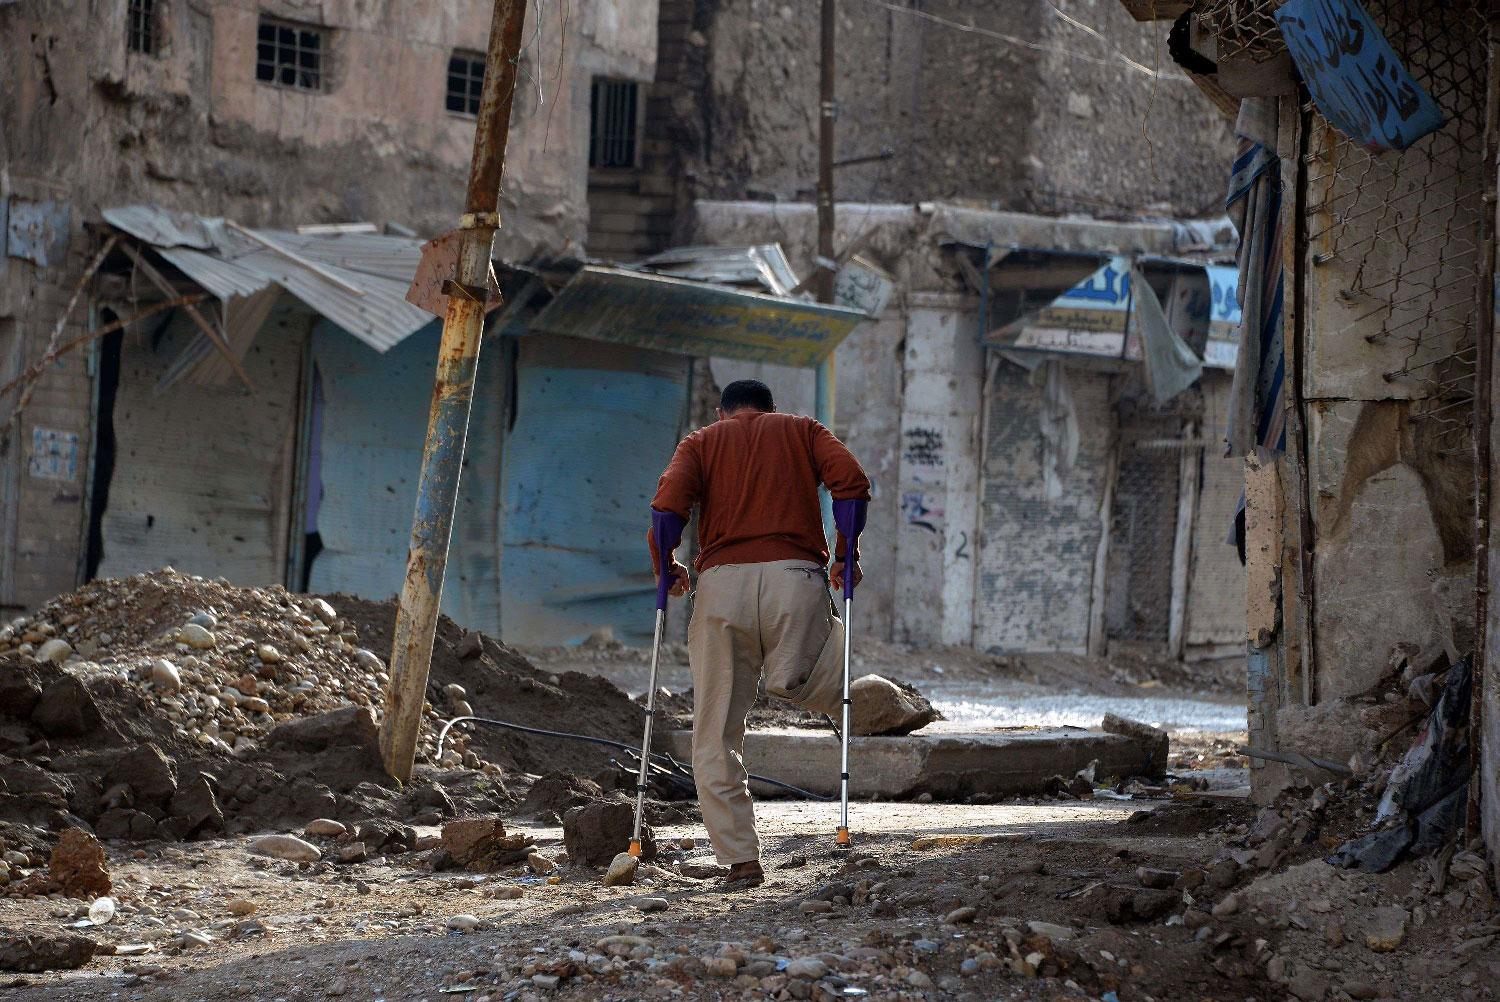 An amputee uses crutches to walk in a debris-strewn street in the old neighbourhood of the northern Iraqi city of Mosul on November 7, 2018.